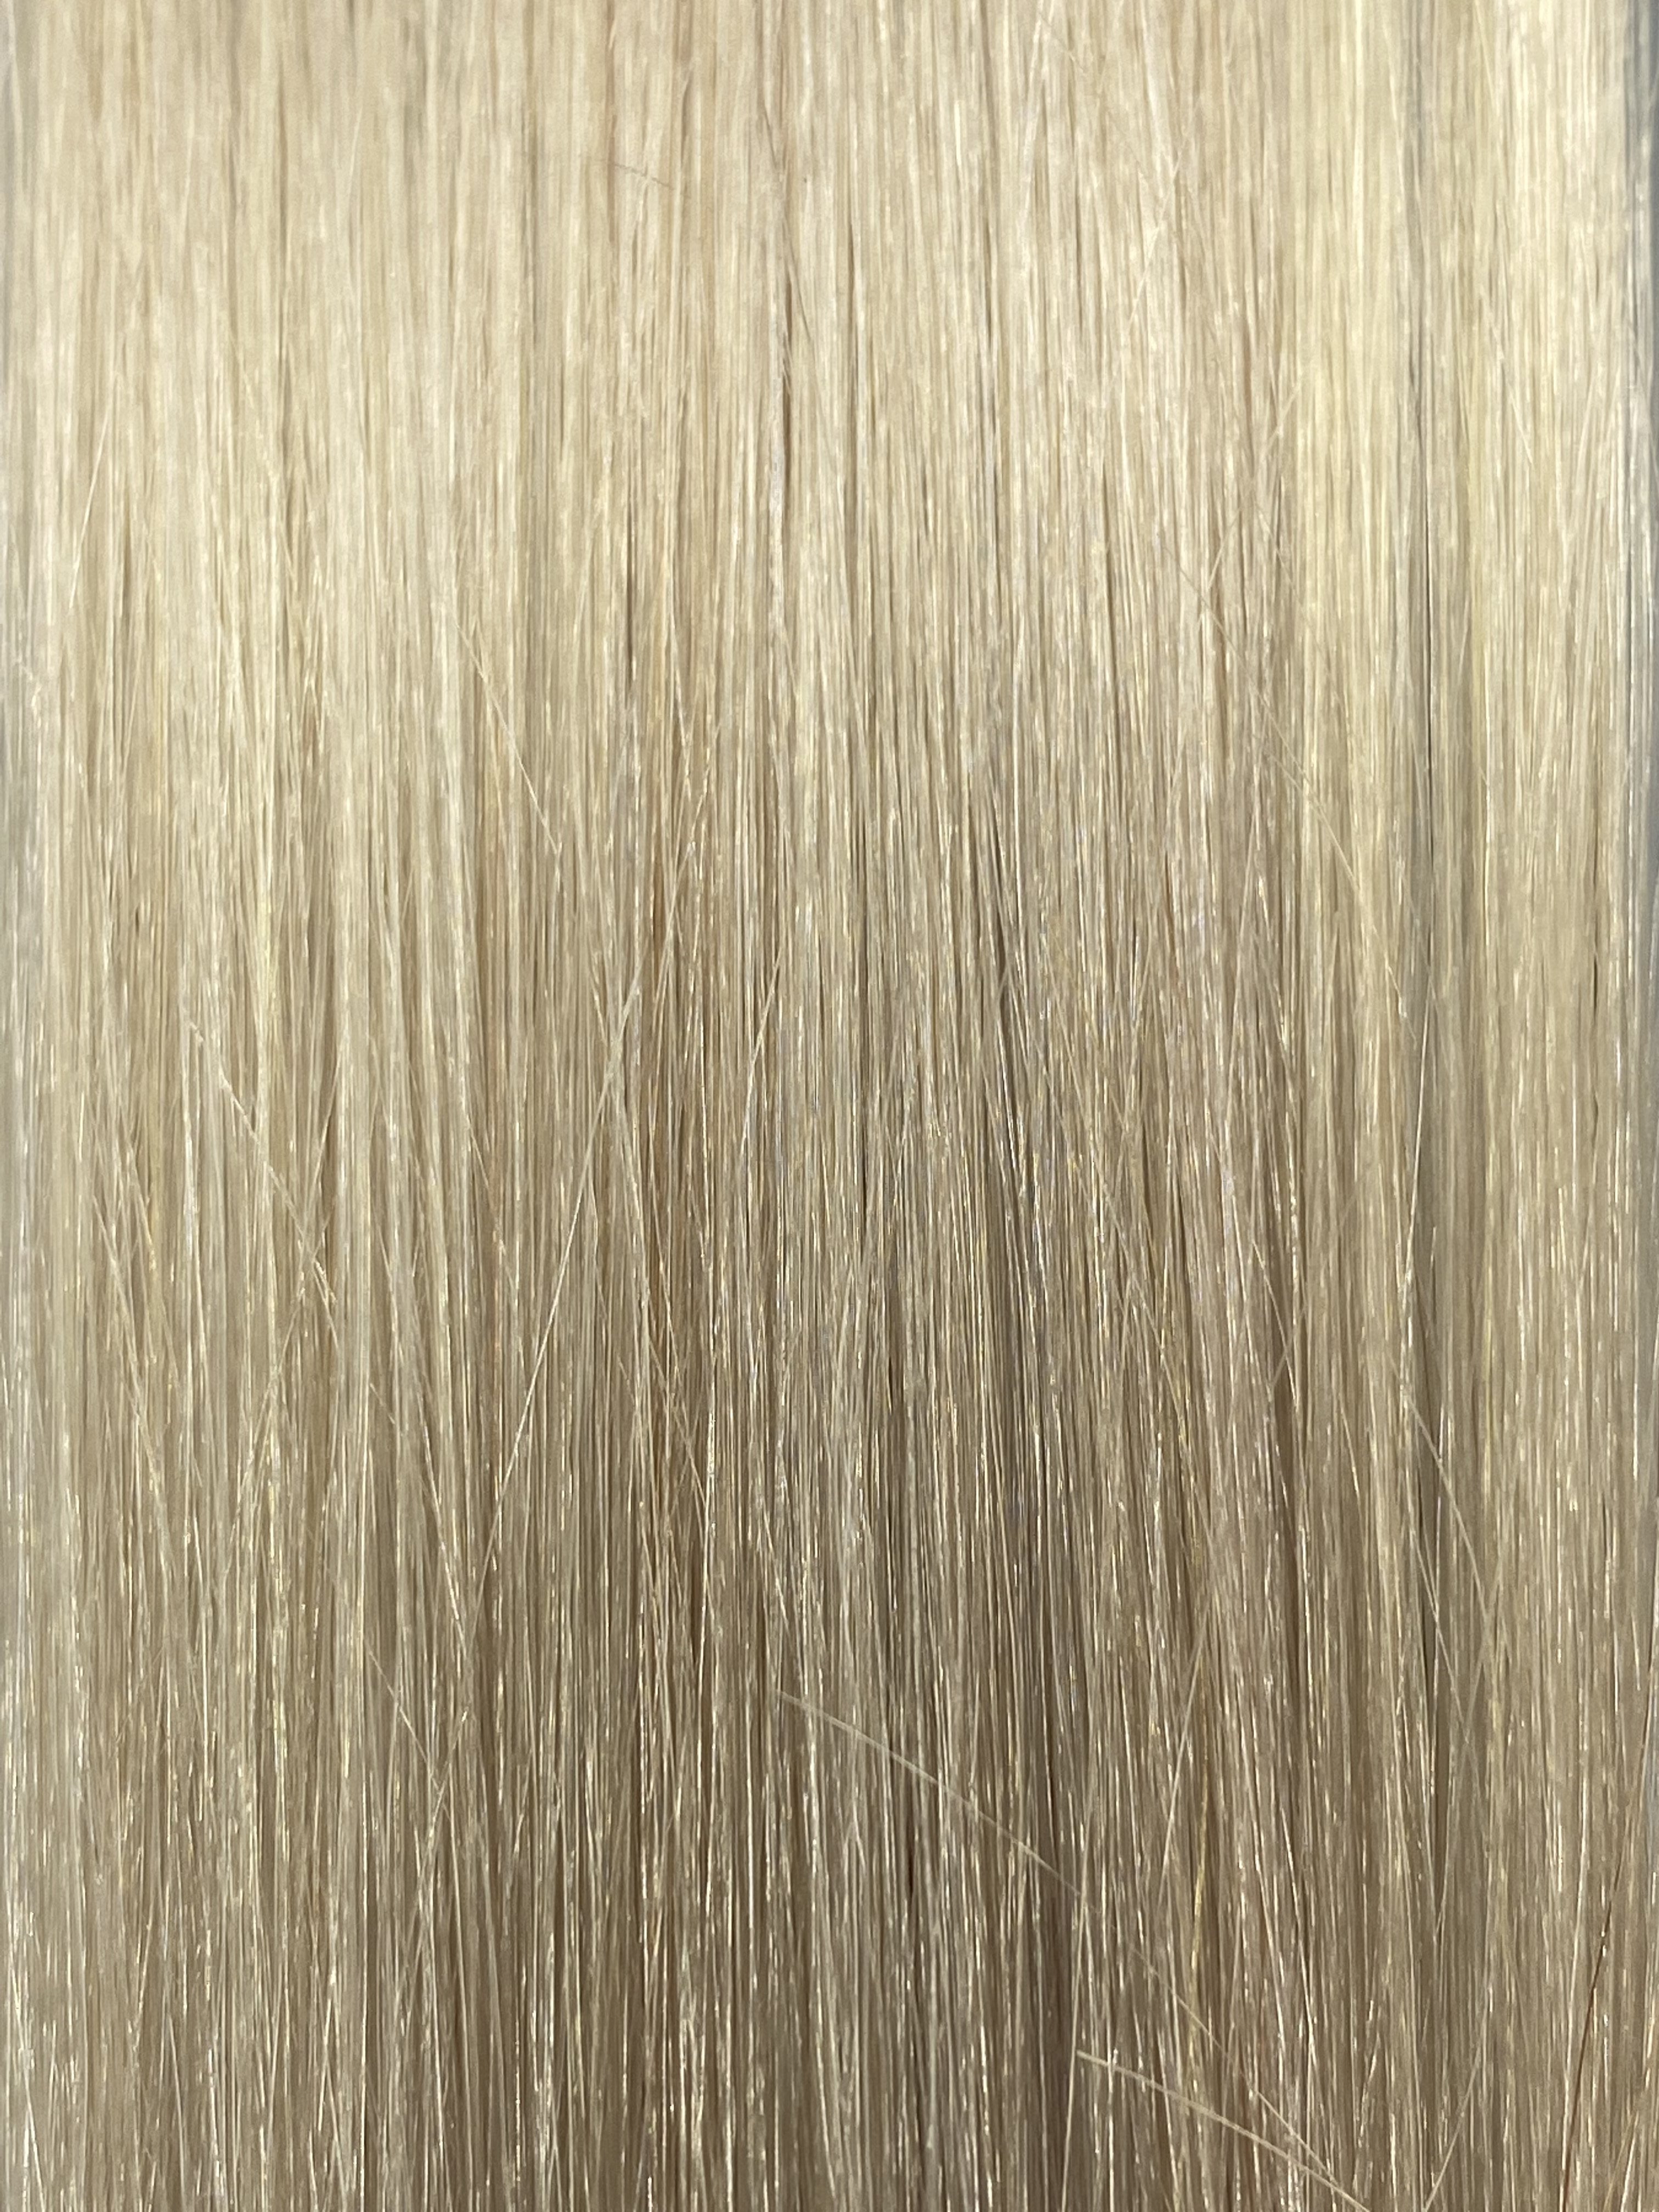 FUSION #1004 ULTRA VERY LIGHT PLATINUM BLONDE 40CM/ 16 INCHES  - 17.5 GRAMS